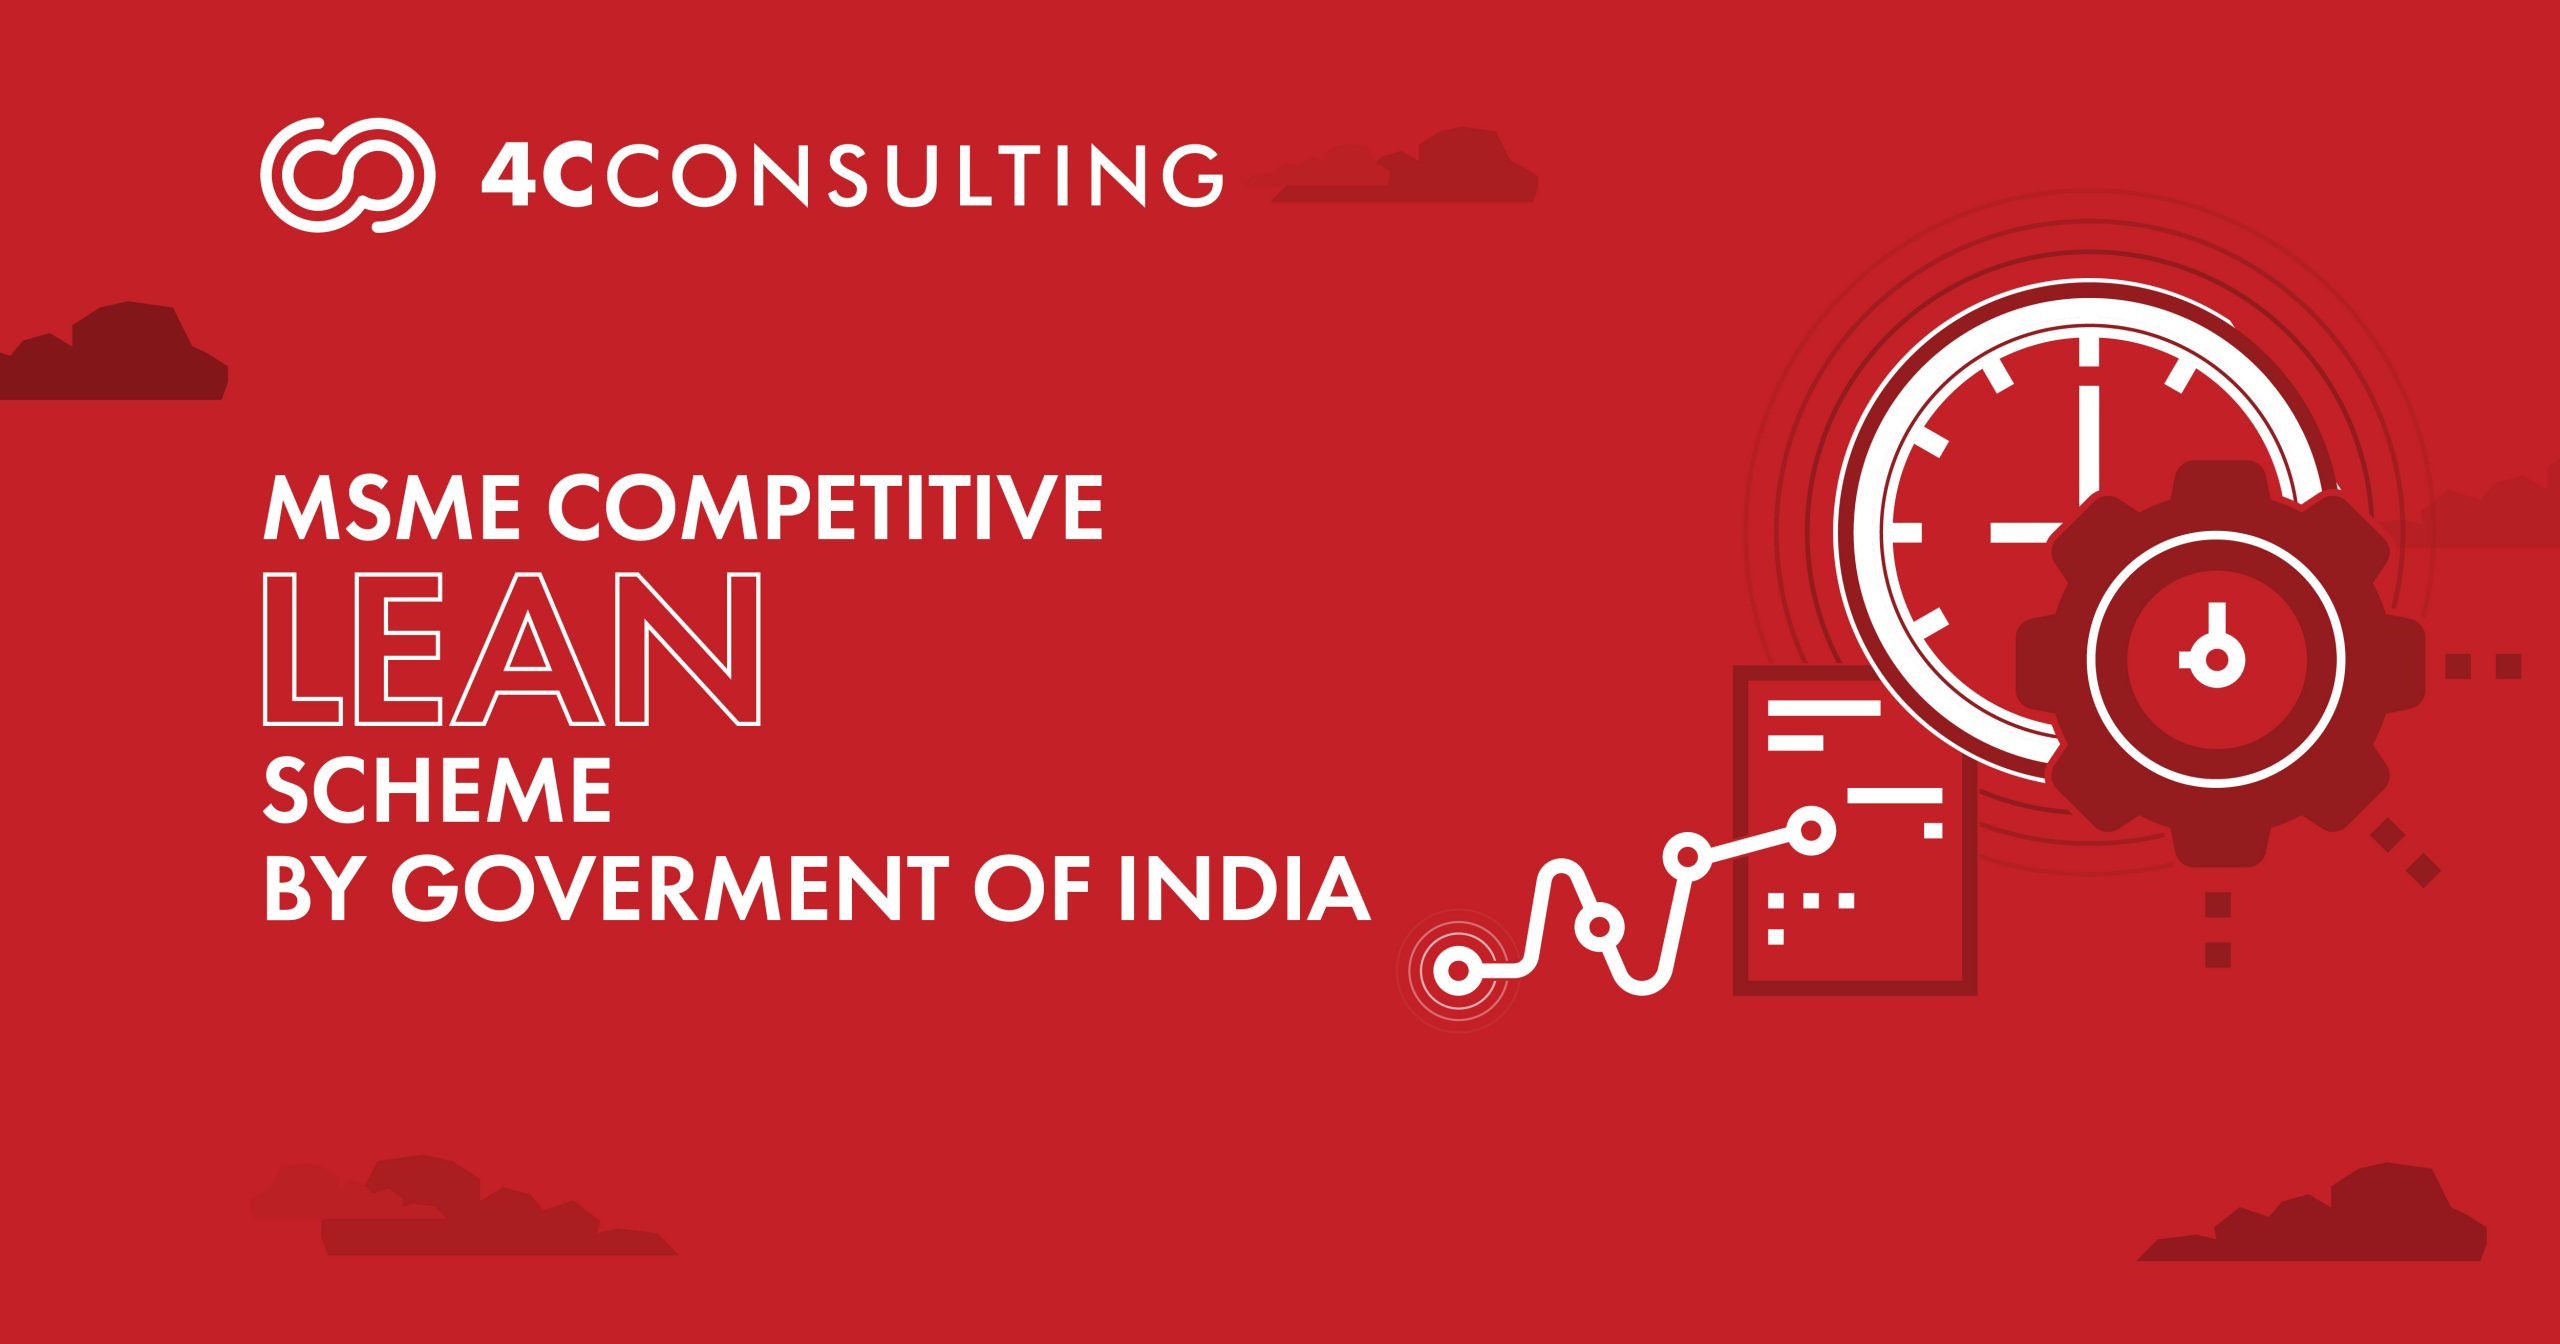 MSME COMPETITIVE LEAN SCHEME: MSME’S COMPETITIVE SCHEME BY GOVERNMENT OF INDIA